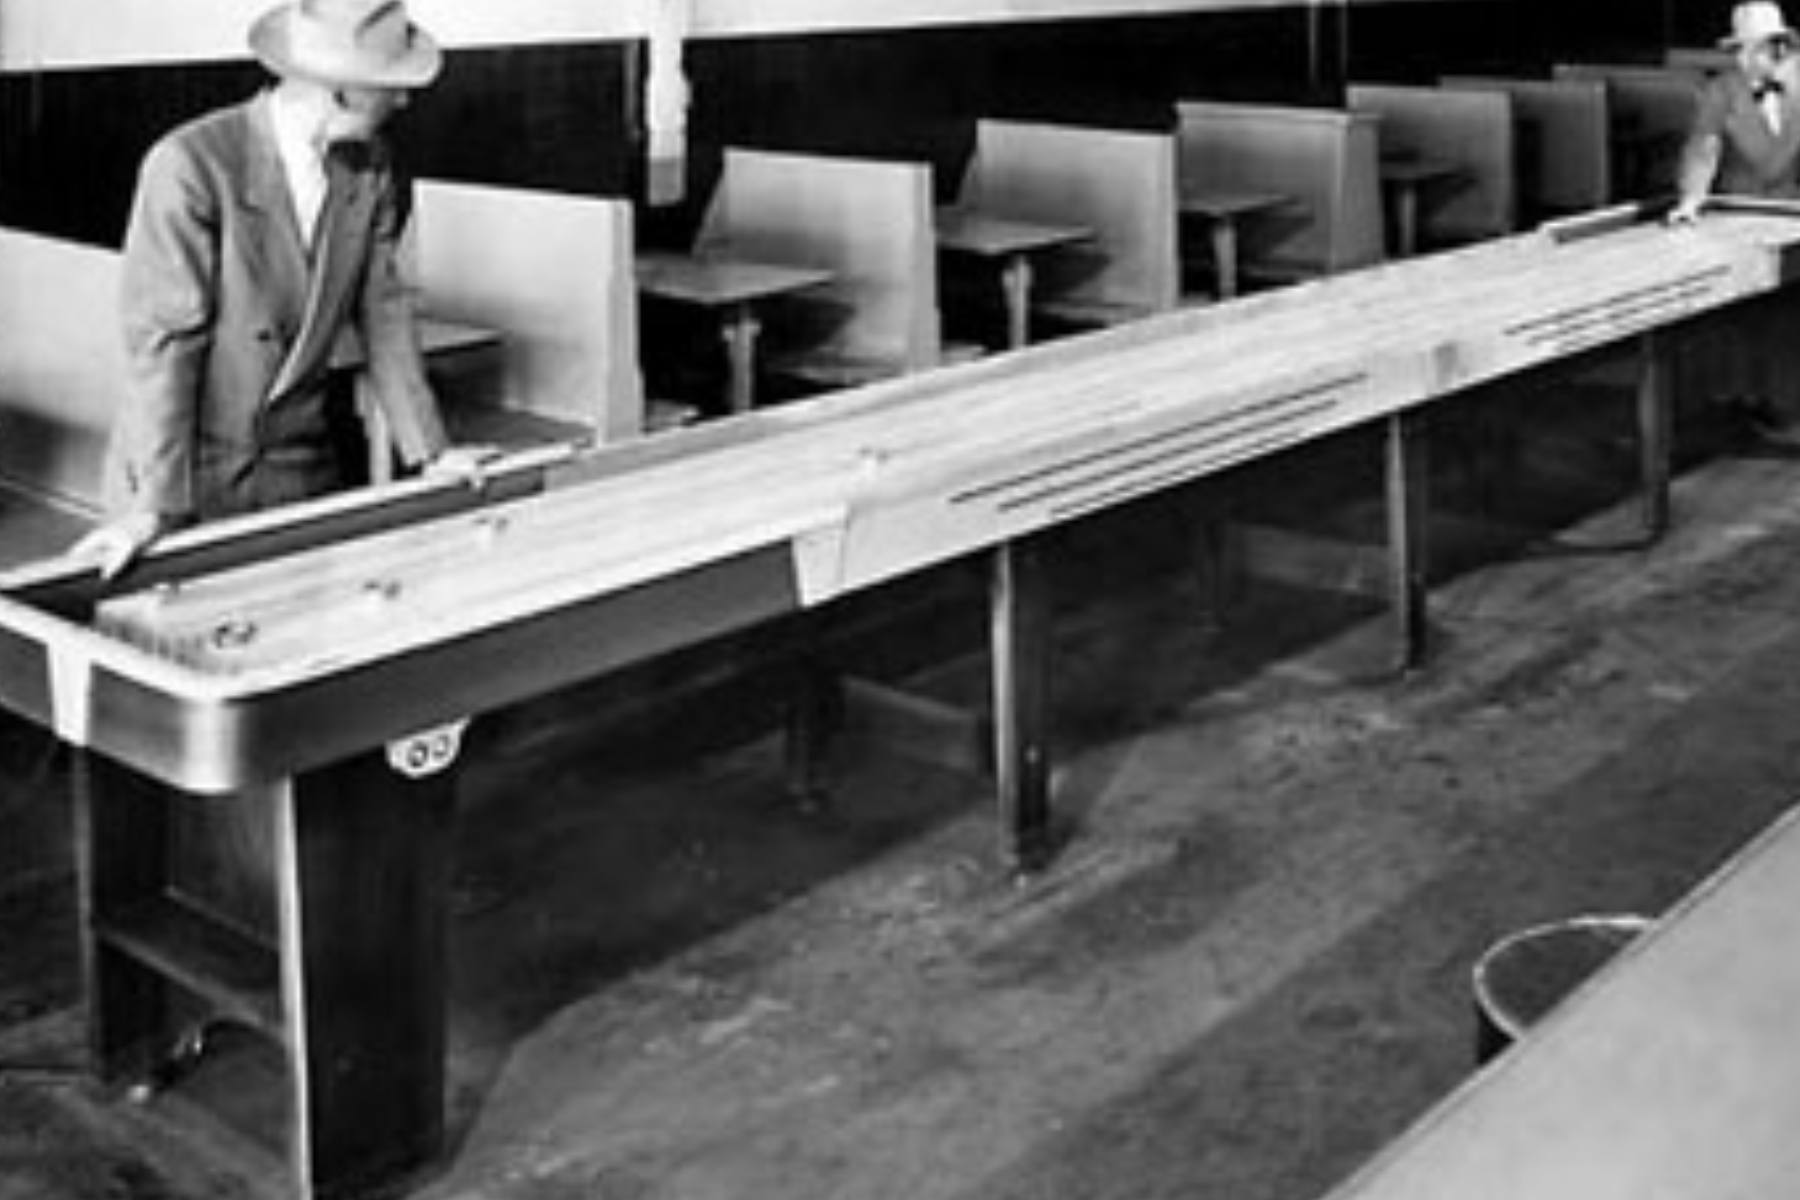 A rare photograph of a lengthy shuffleboard table from the 1990s